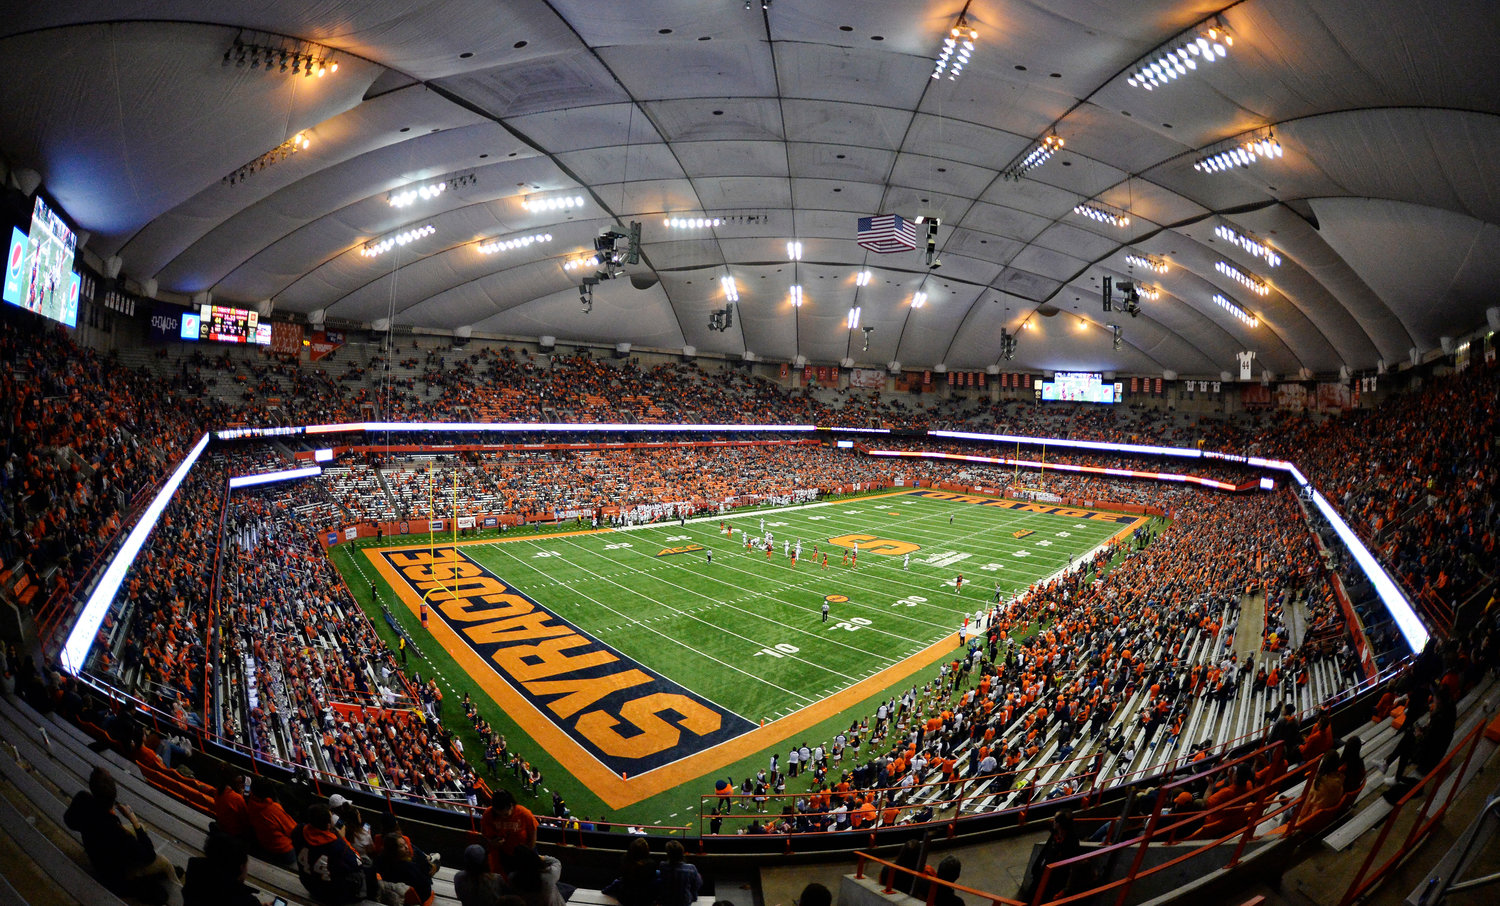 Syracuse and Louisville play a college football game at then Carrier Dome in Syracuse on Nov. 9, 2018. Syracuse University and JMA Wireless on Thursday announced a 10-year partnership for naming rights of the university’s iconic indoor stadium.